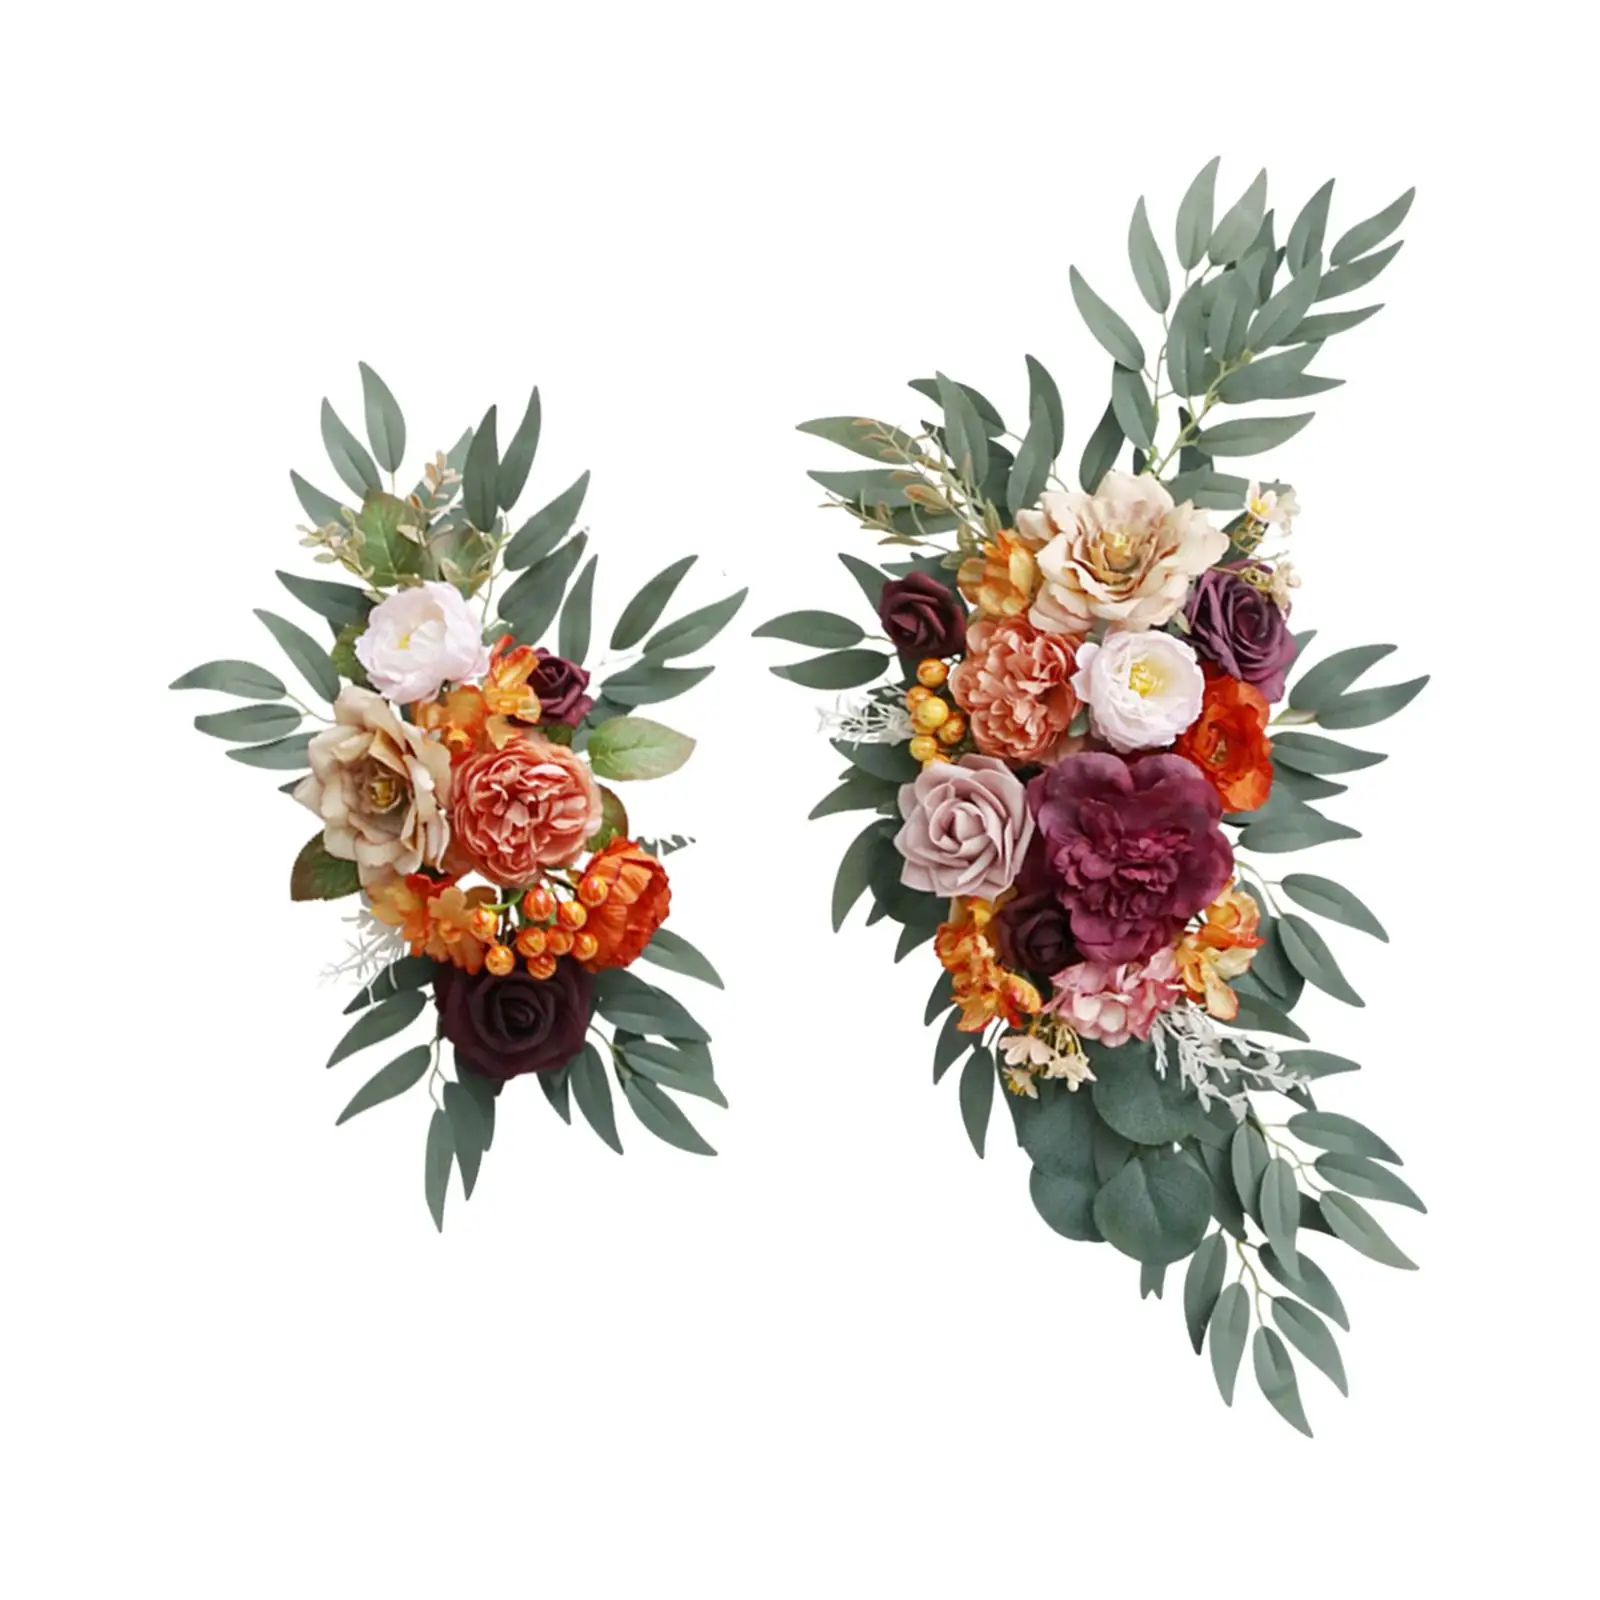 Wedding Arch Flowers Wreath Handmade Flower Swag for Decorating Wedding Decor Set of 2 for Backdrop Arbor Table Party Decoration